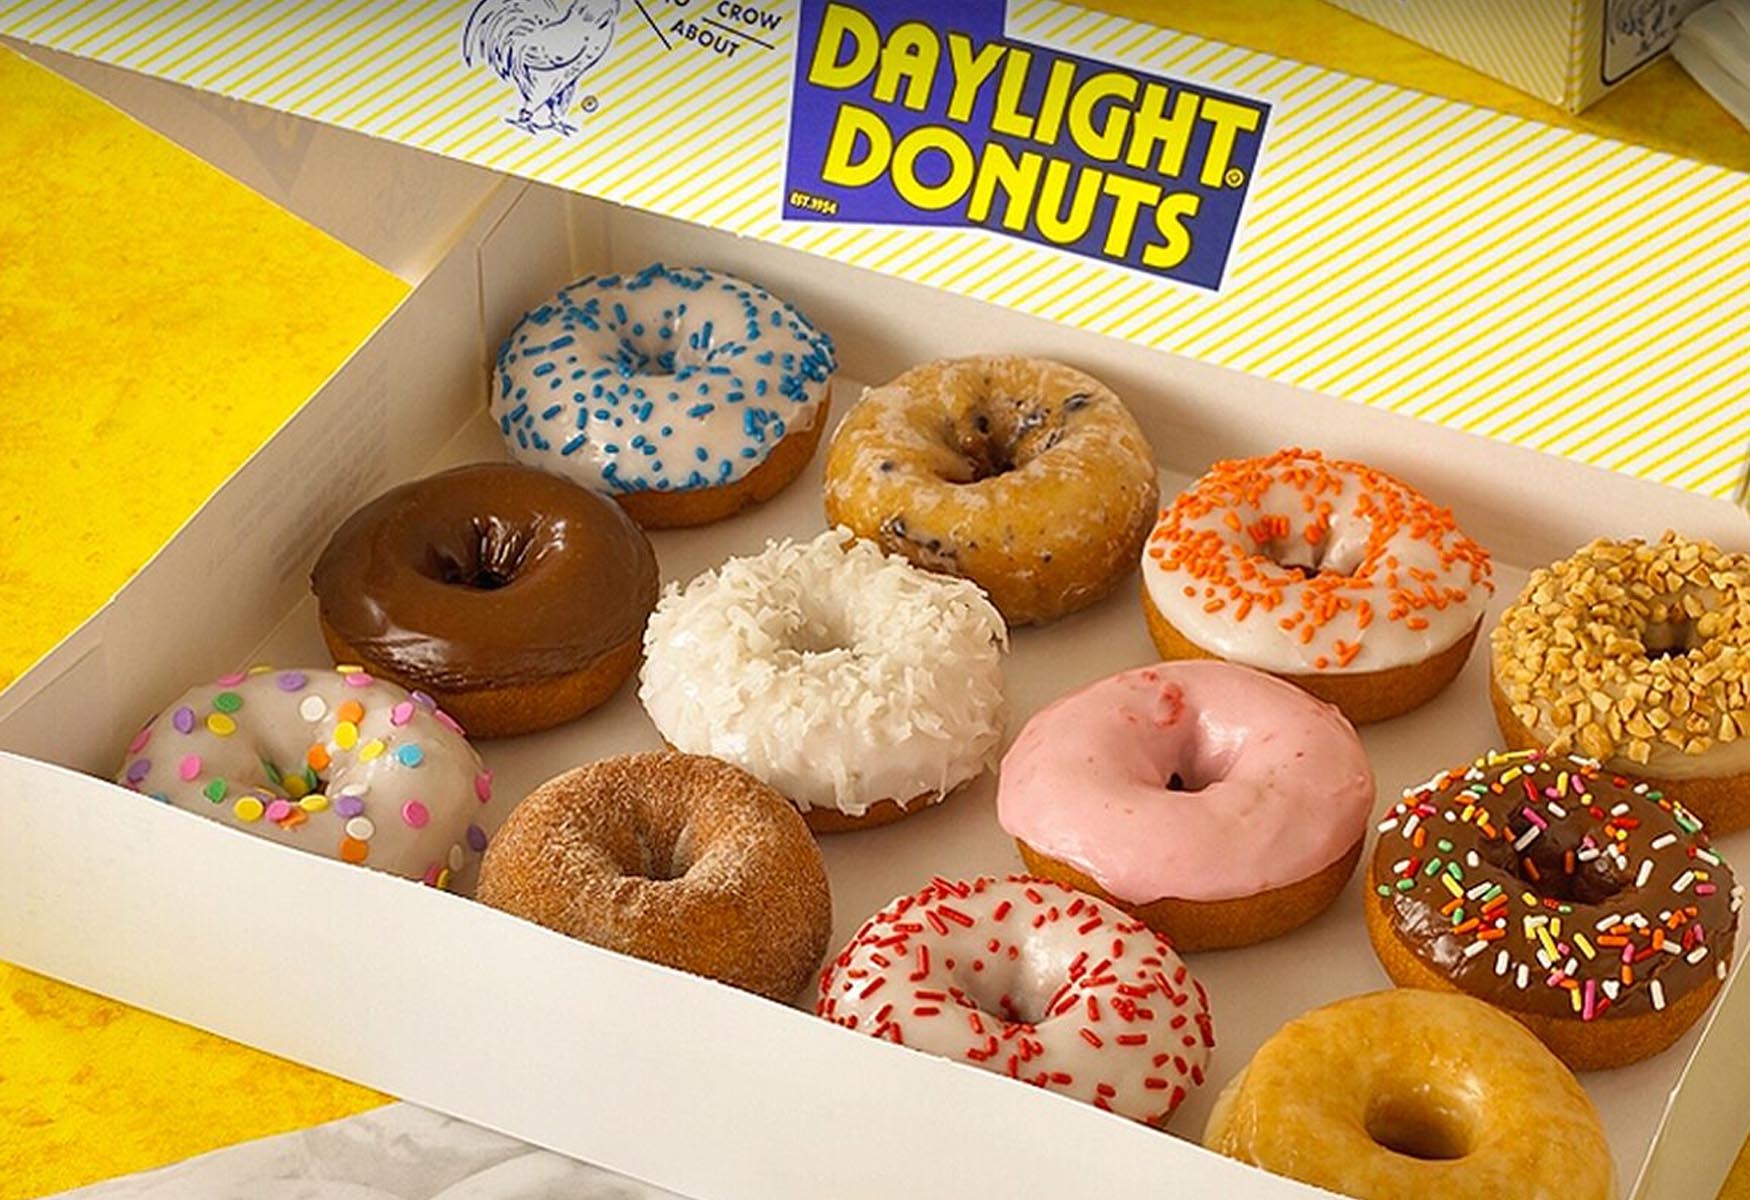 20-daylight-donuts-nutrition-facts